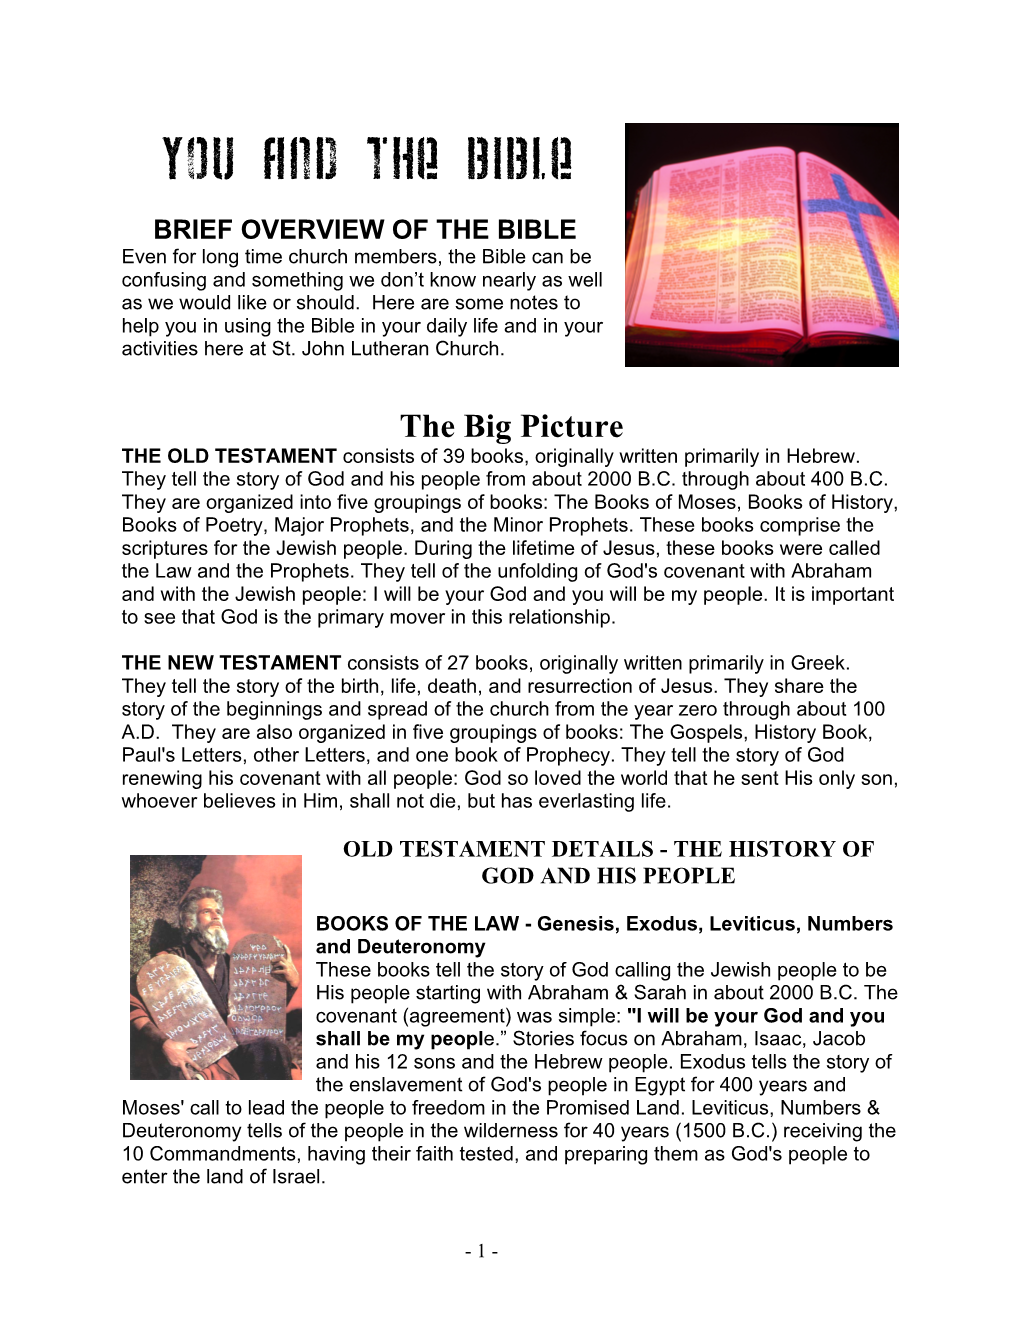 BRIEF OVERVIEW of the BIBLE Even for Long Time Church Members, the Bible Can Be Confusing and Something We Don’T Know Nearly As Well As We Would Like Or Should